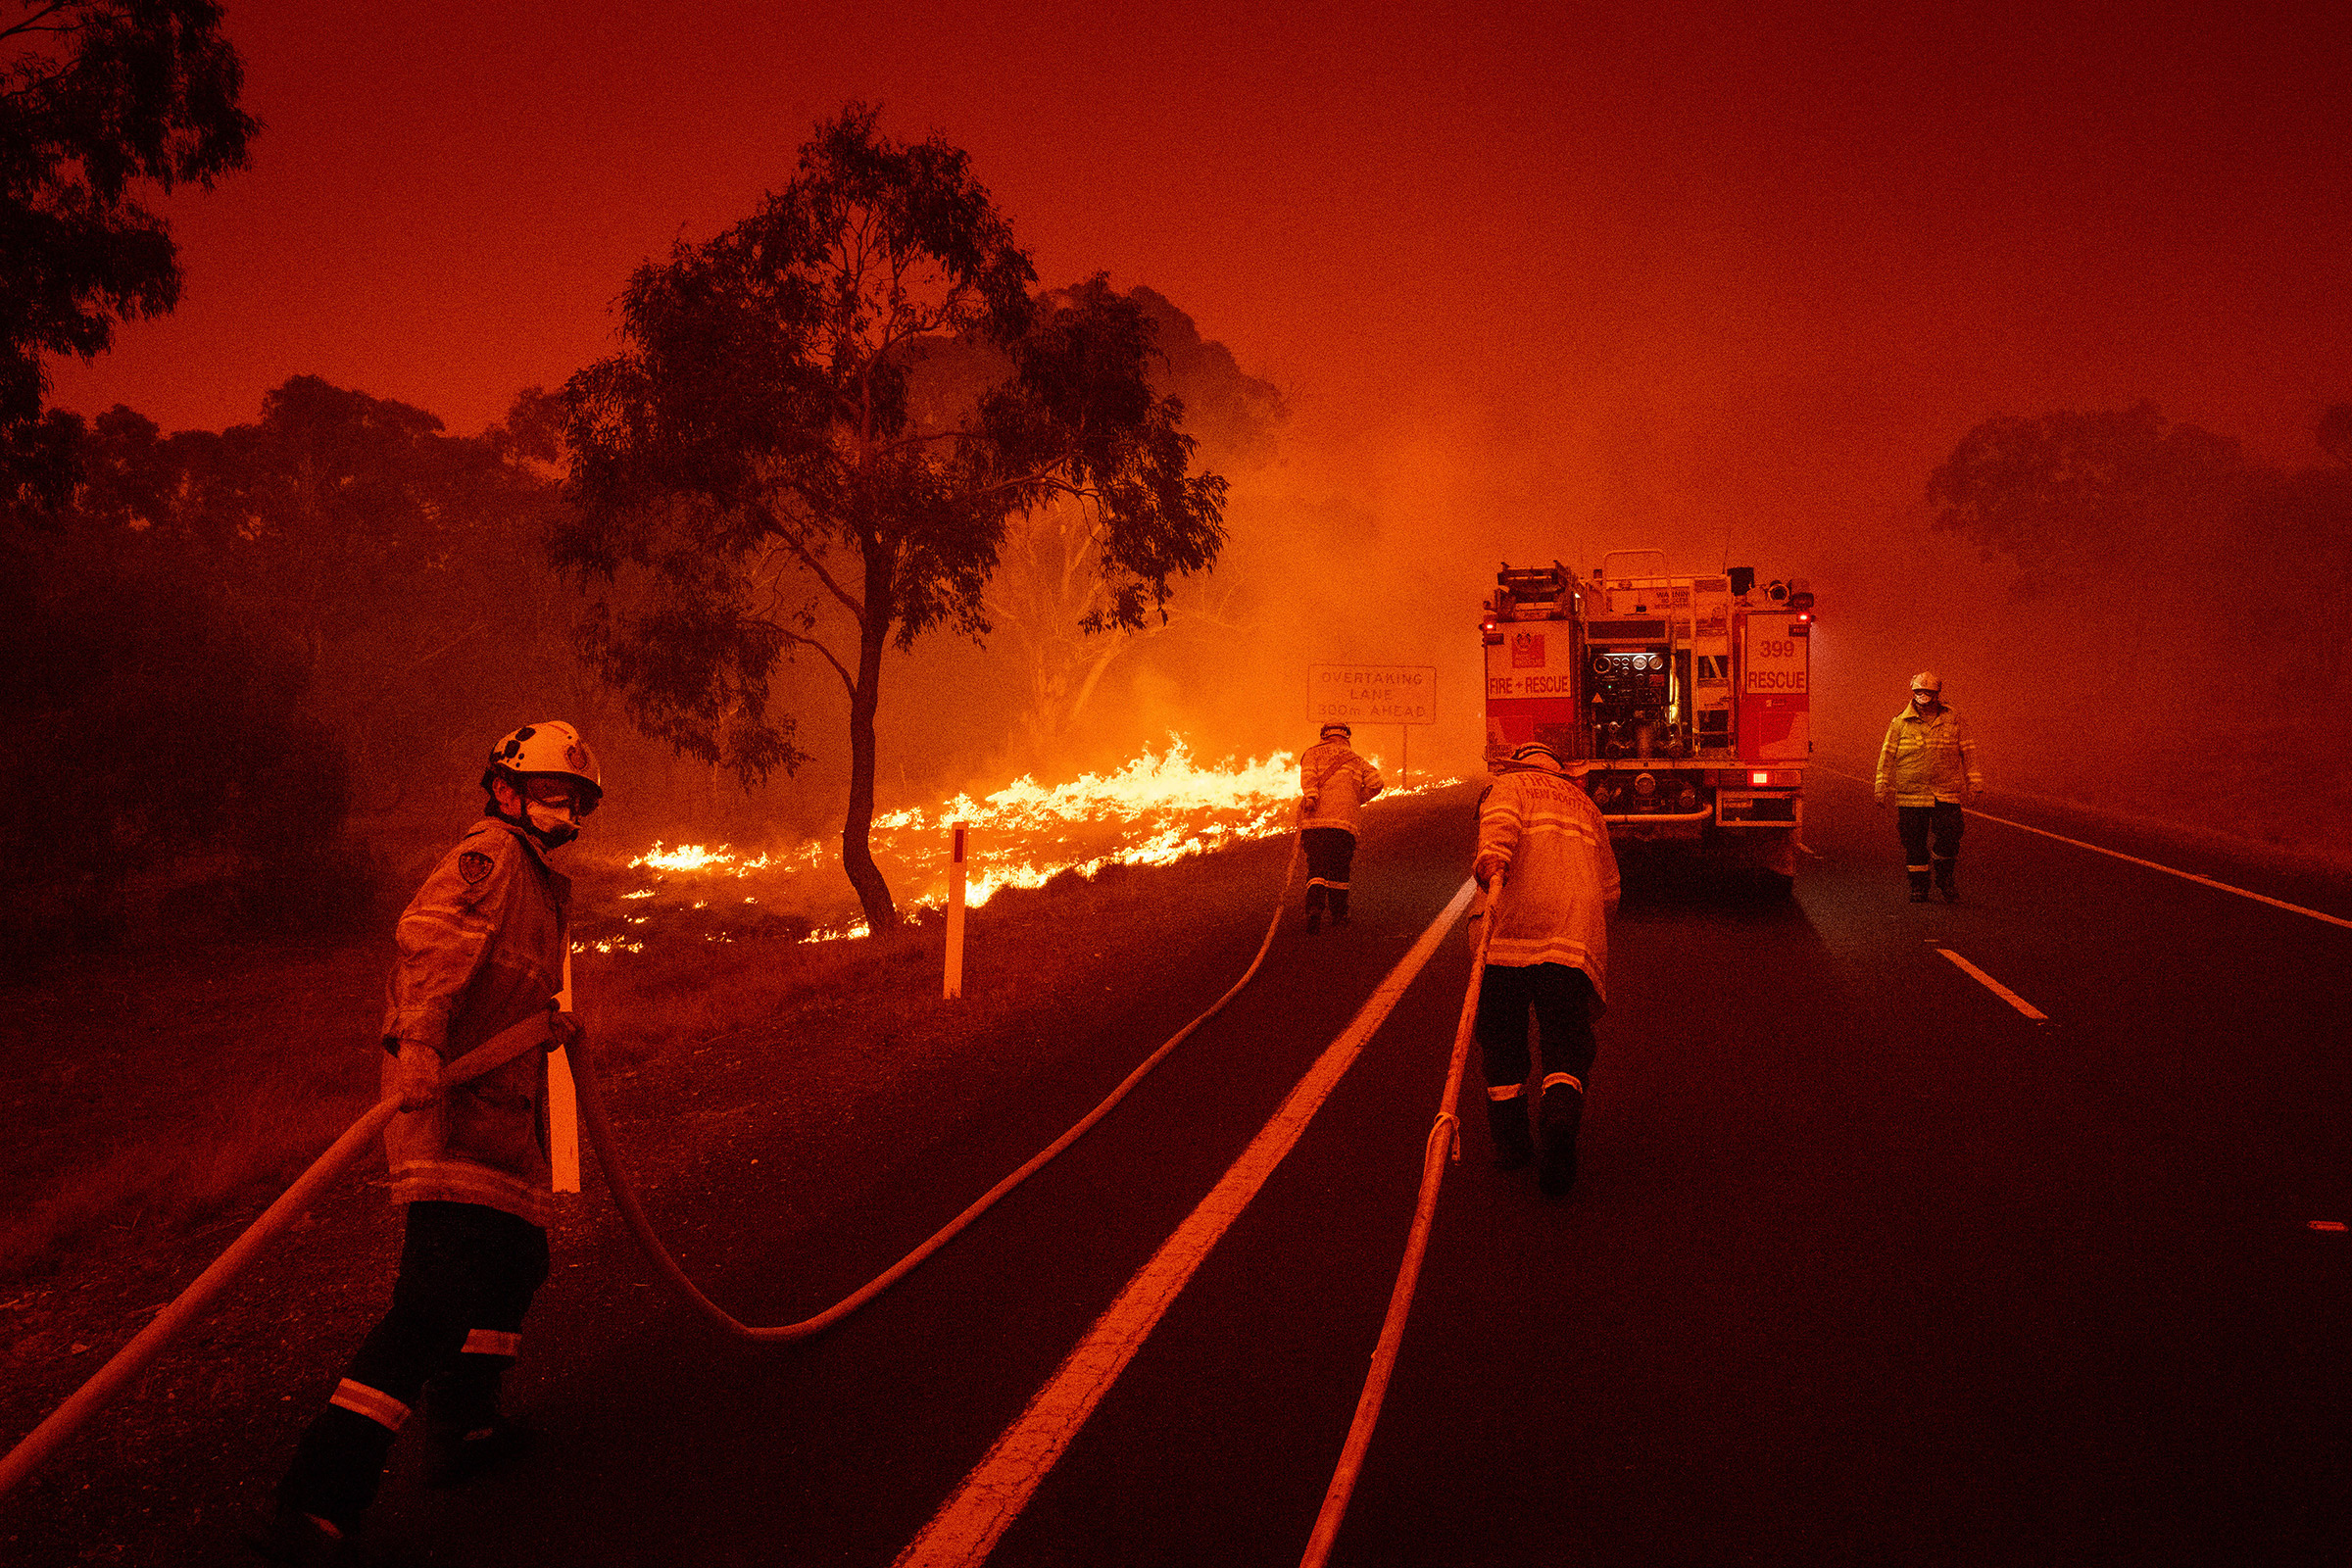 Firefighters on the outskirts of Bredbo, New South Wales, Australia, on Feb. 1 (Matthew Abbott—The New York Times/Redux)